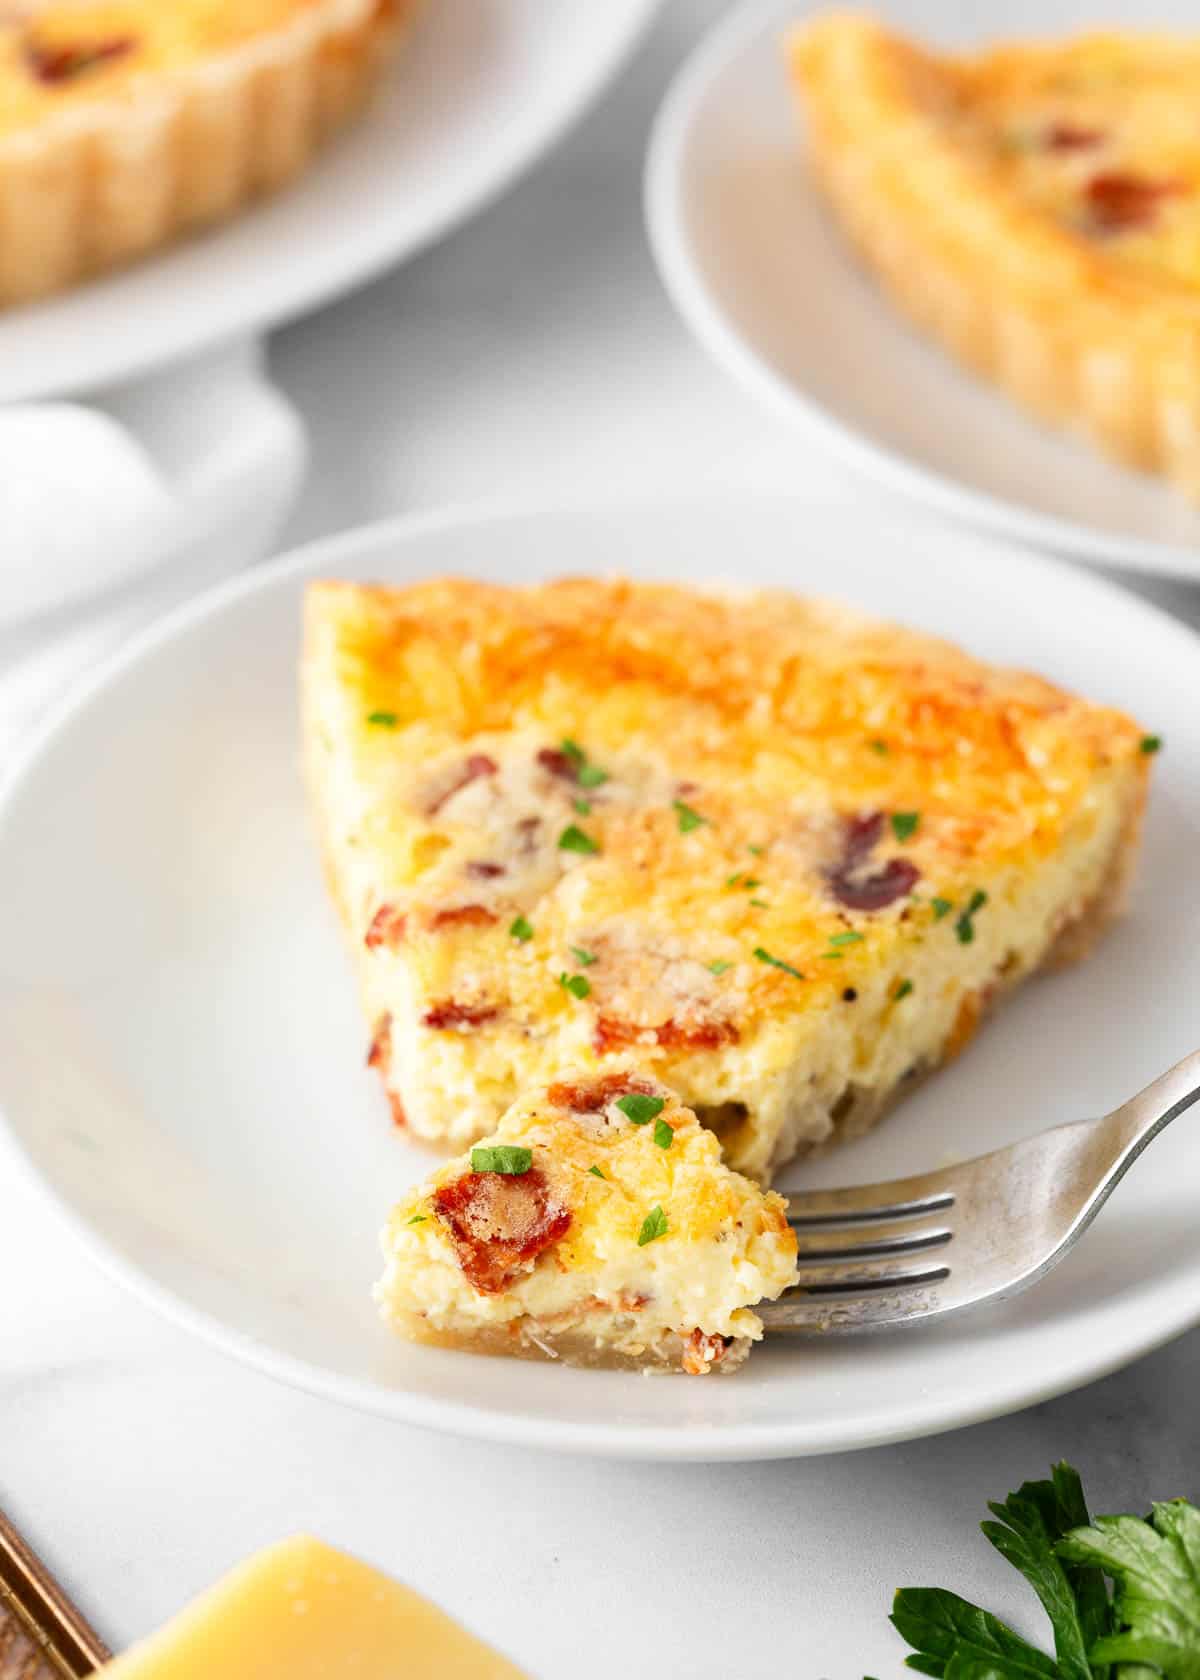 Slice of quiche lorraine on a white plate with fork.